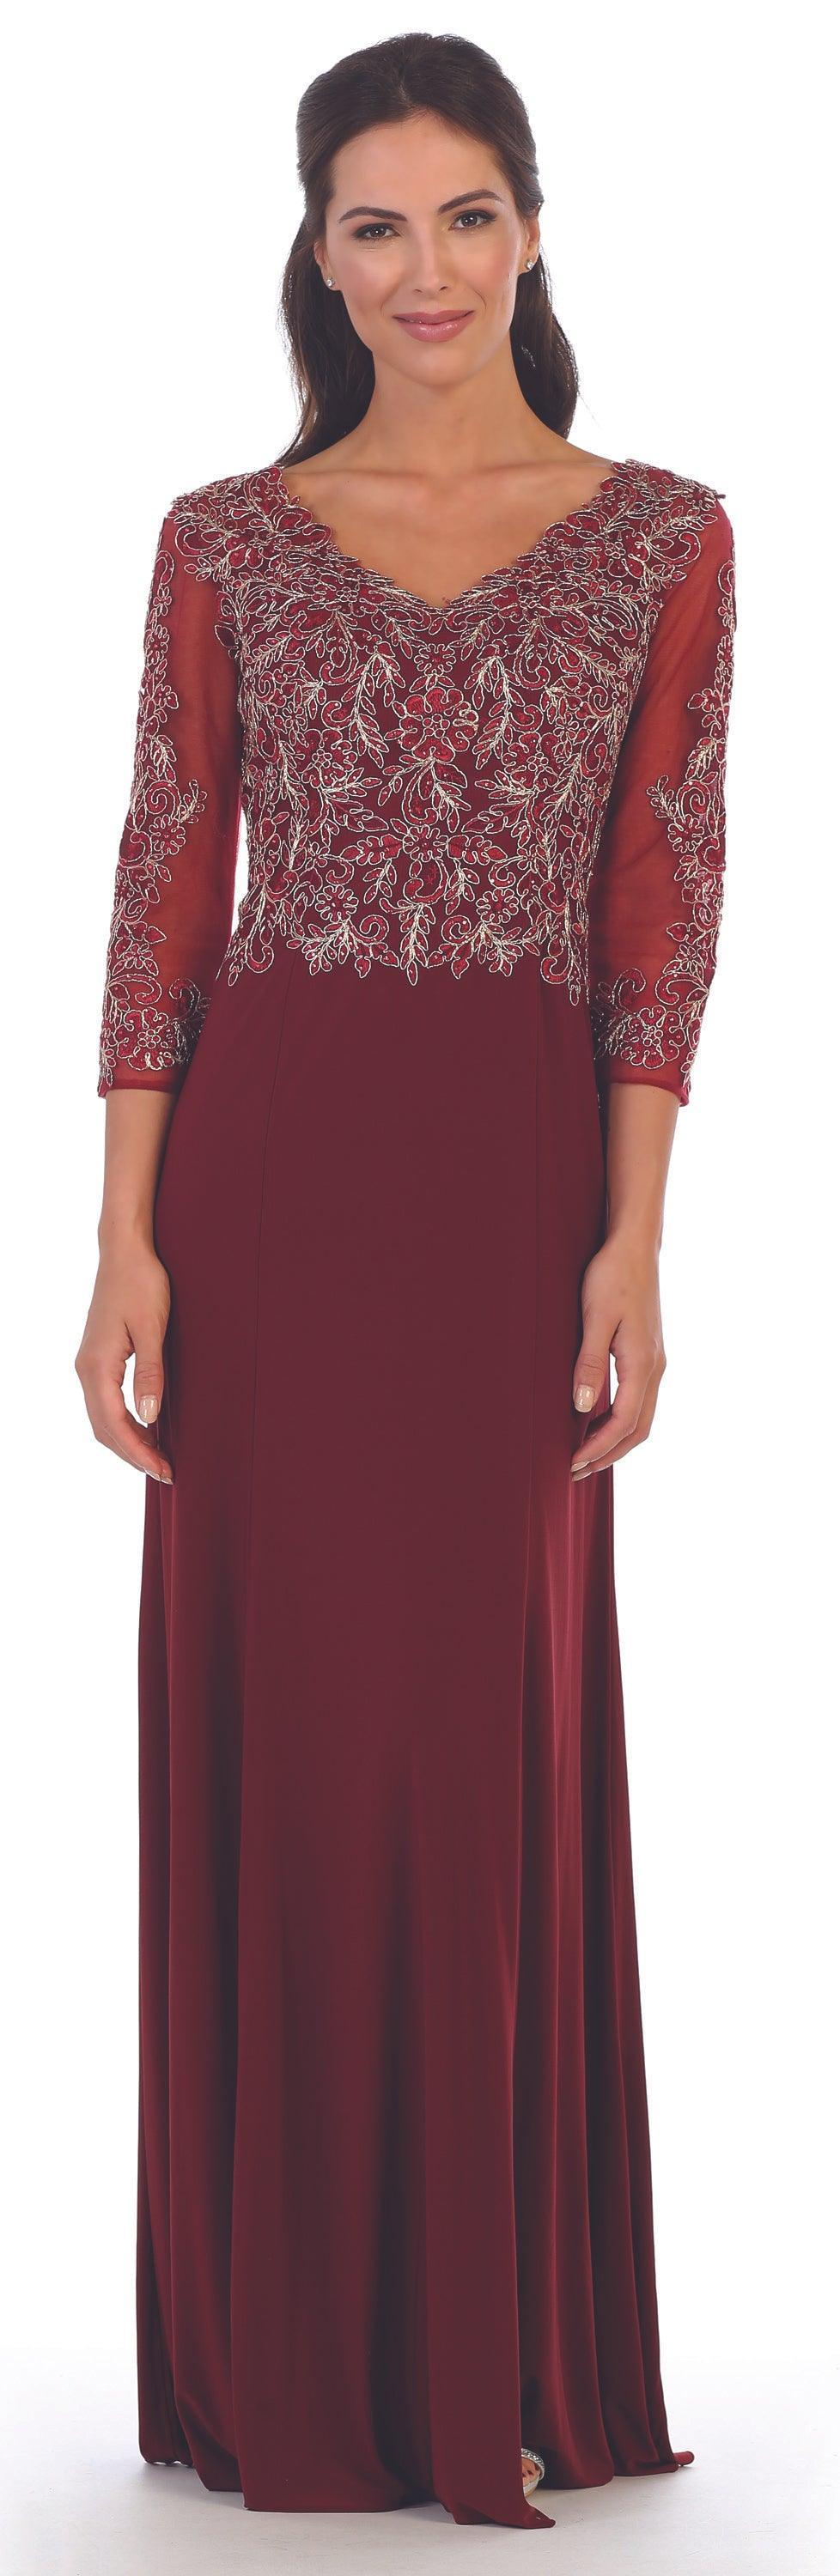 Long Mother of the Bride Long Sleeve Formal Dress Sale - The Dress Outlet